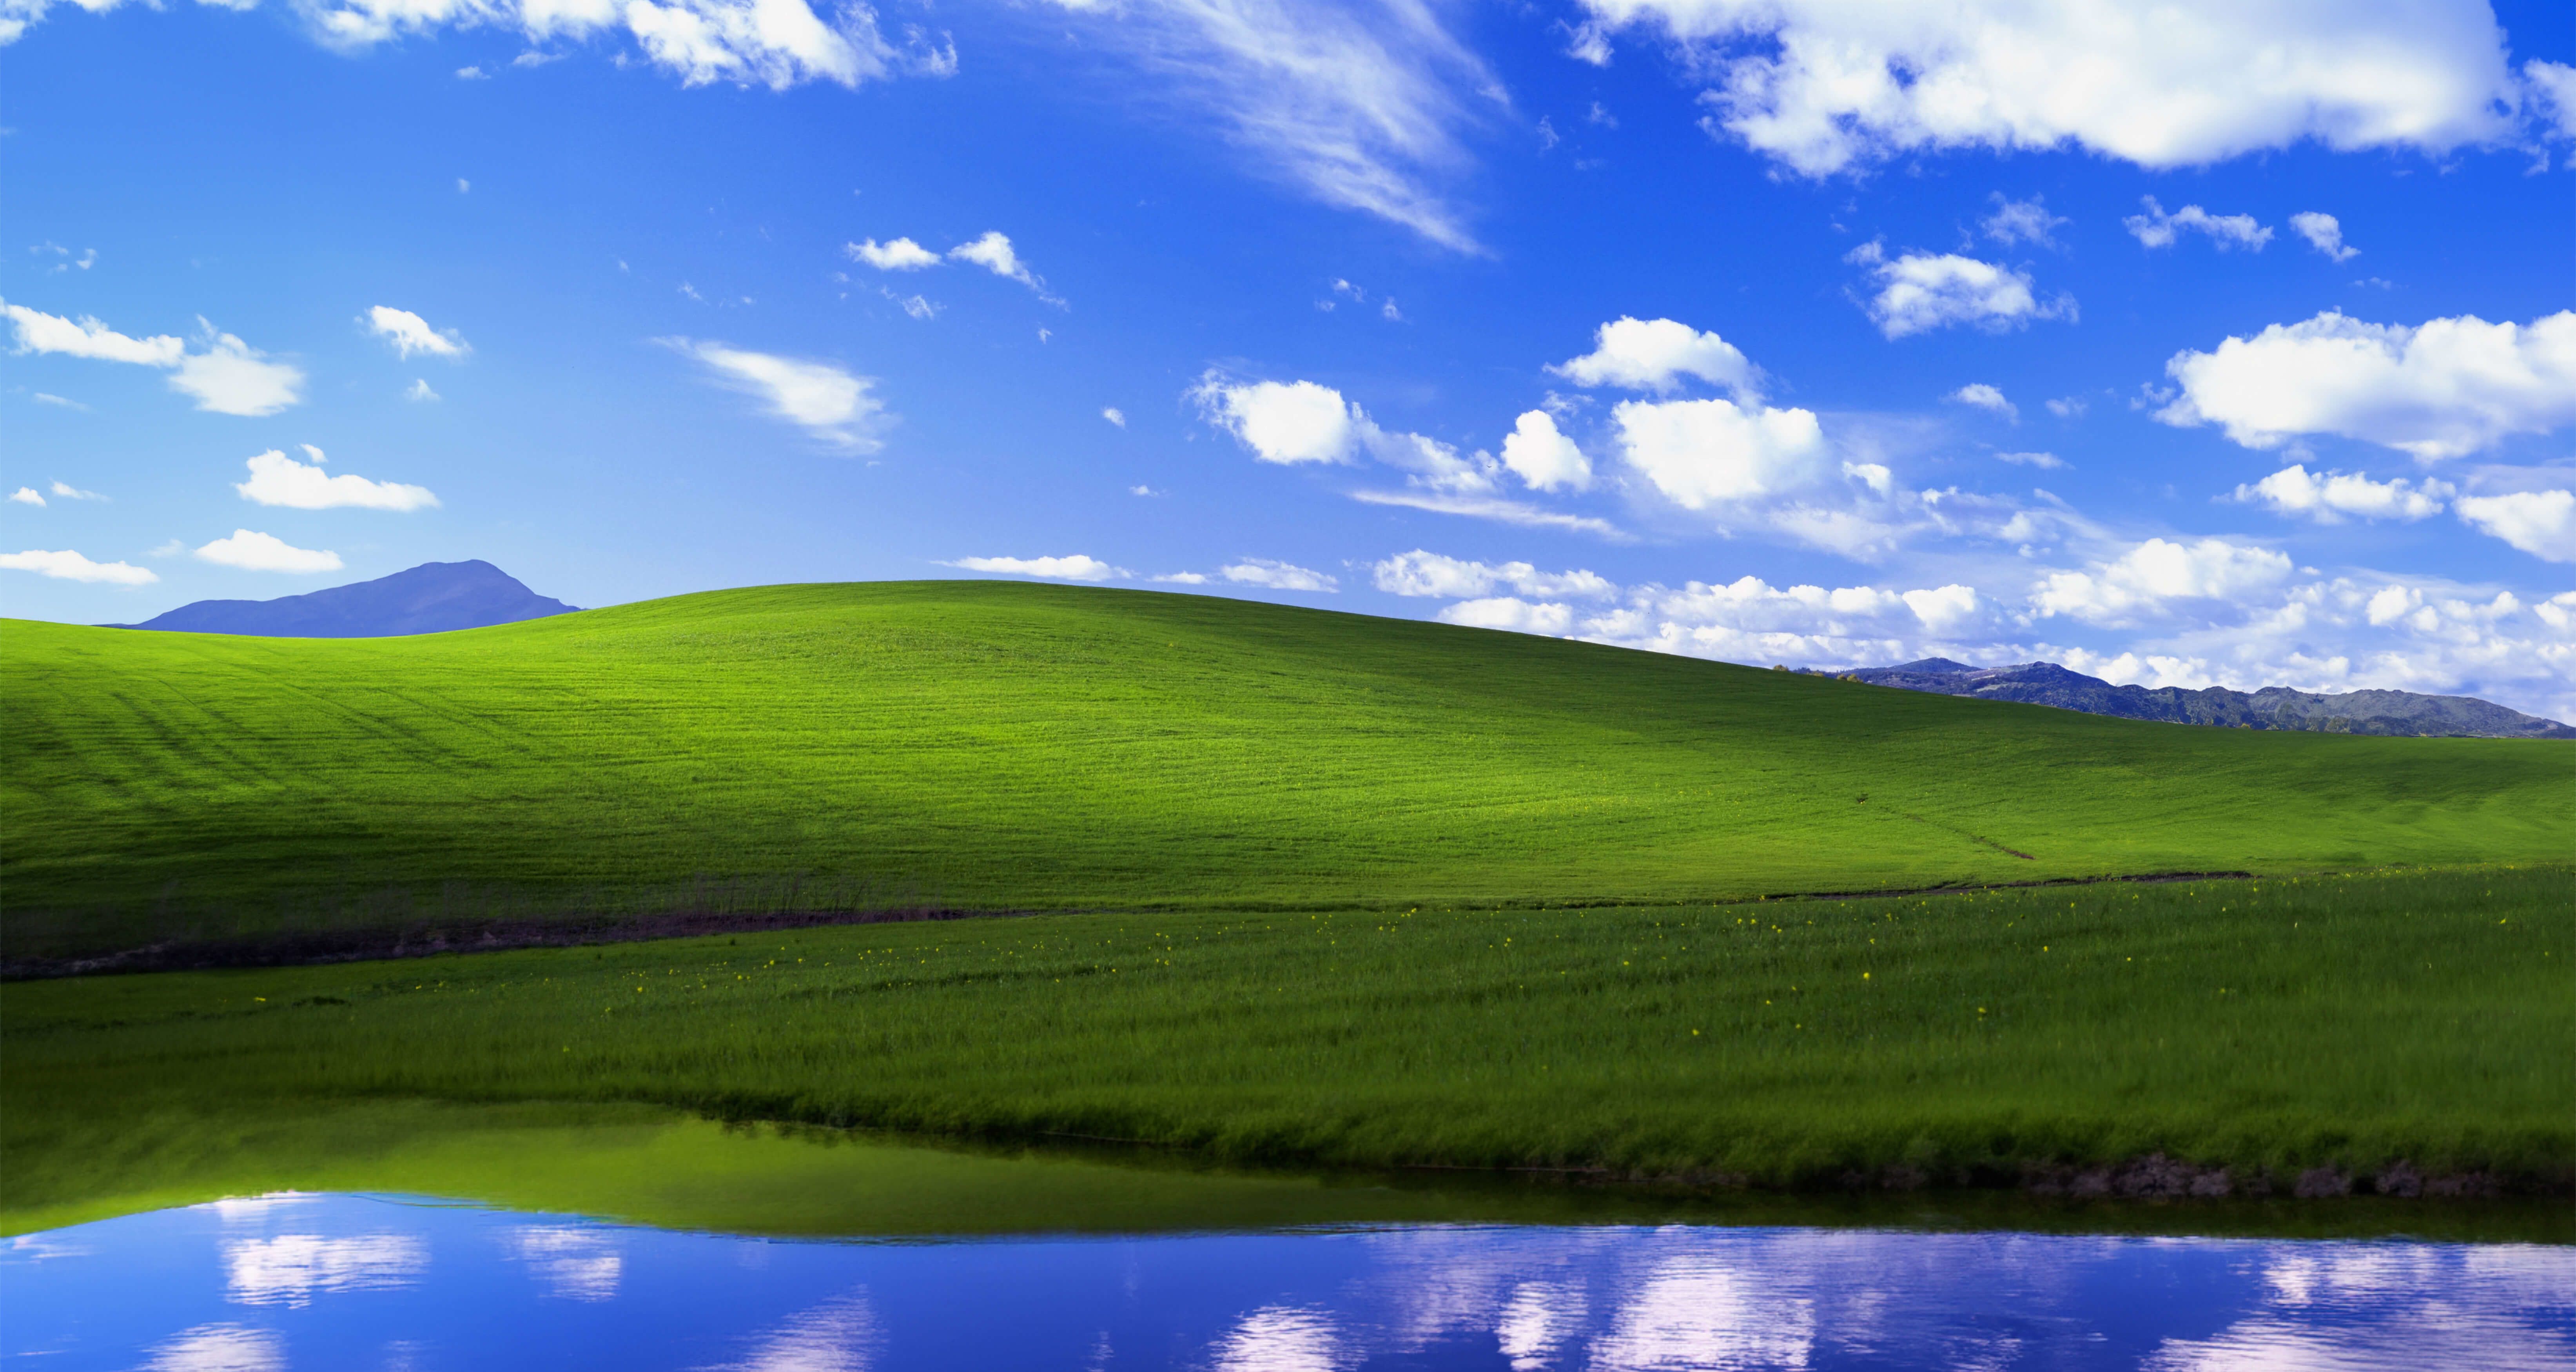 A beautiful landscape of a green field with a blue sky and clouds. - Windows 11